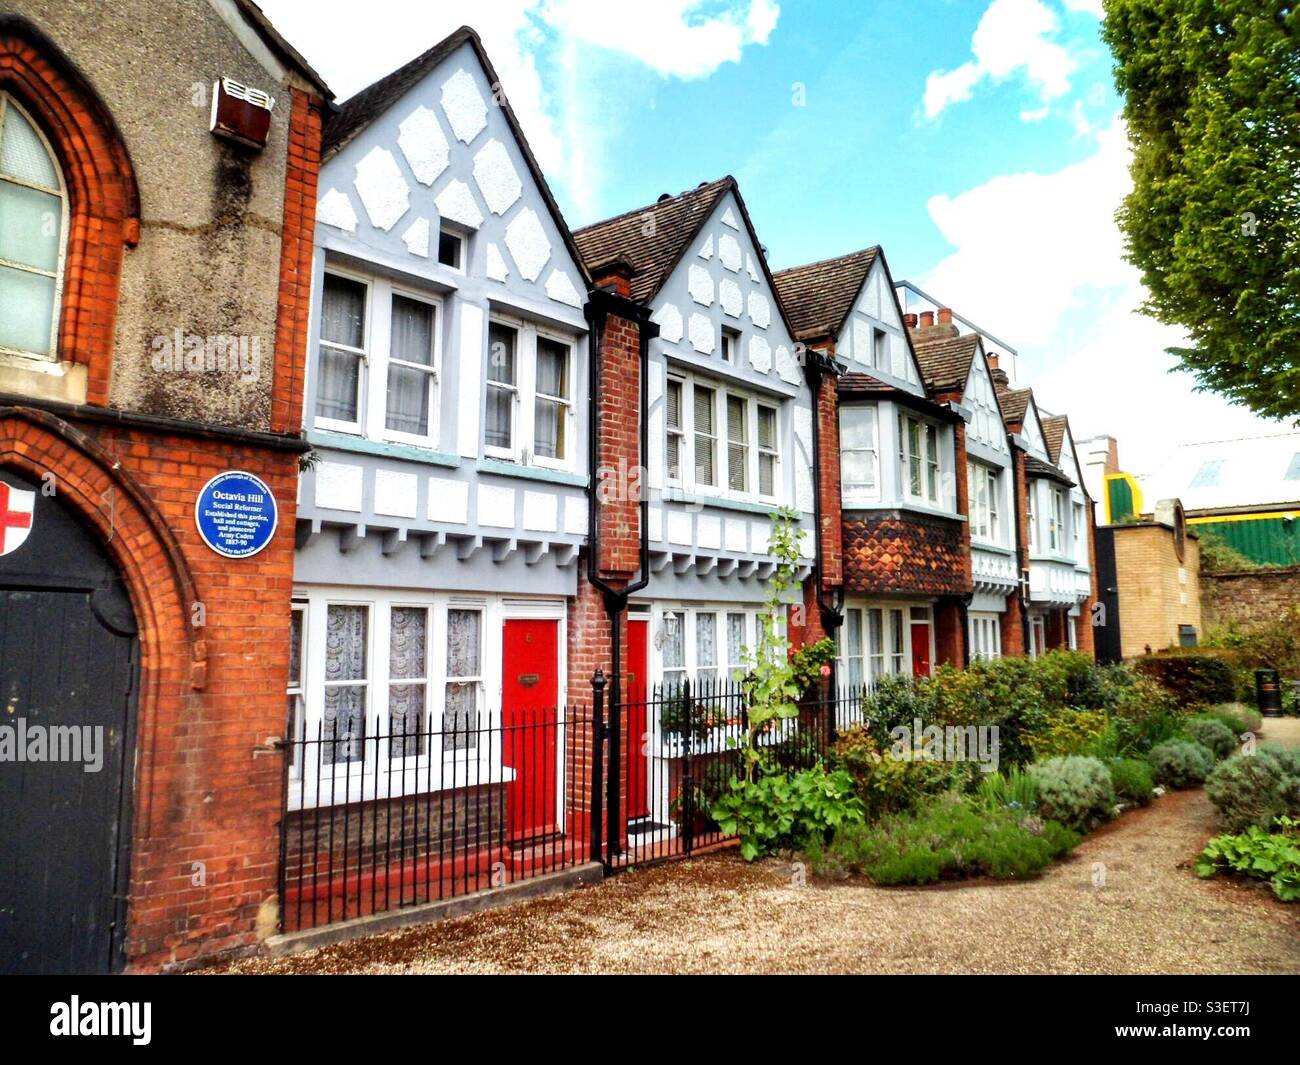 The Tudor style Redcross Cottages, Southwark, London. Designed by the philanthropist, Octavia Hill, in the 1880s as good quality social housing for the Victorian working classes. Stock Photo